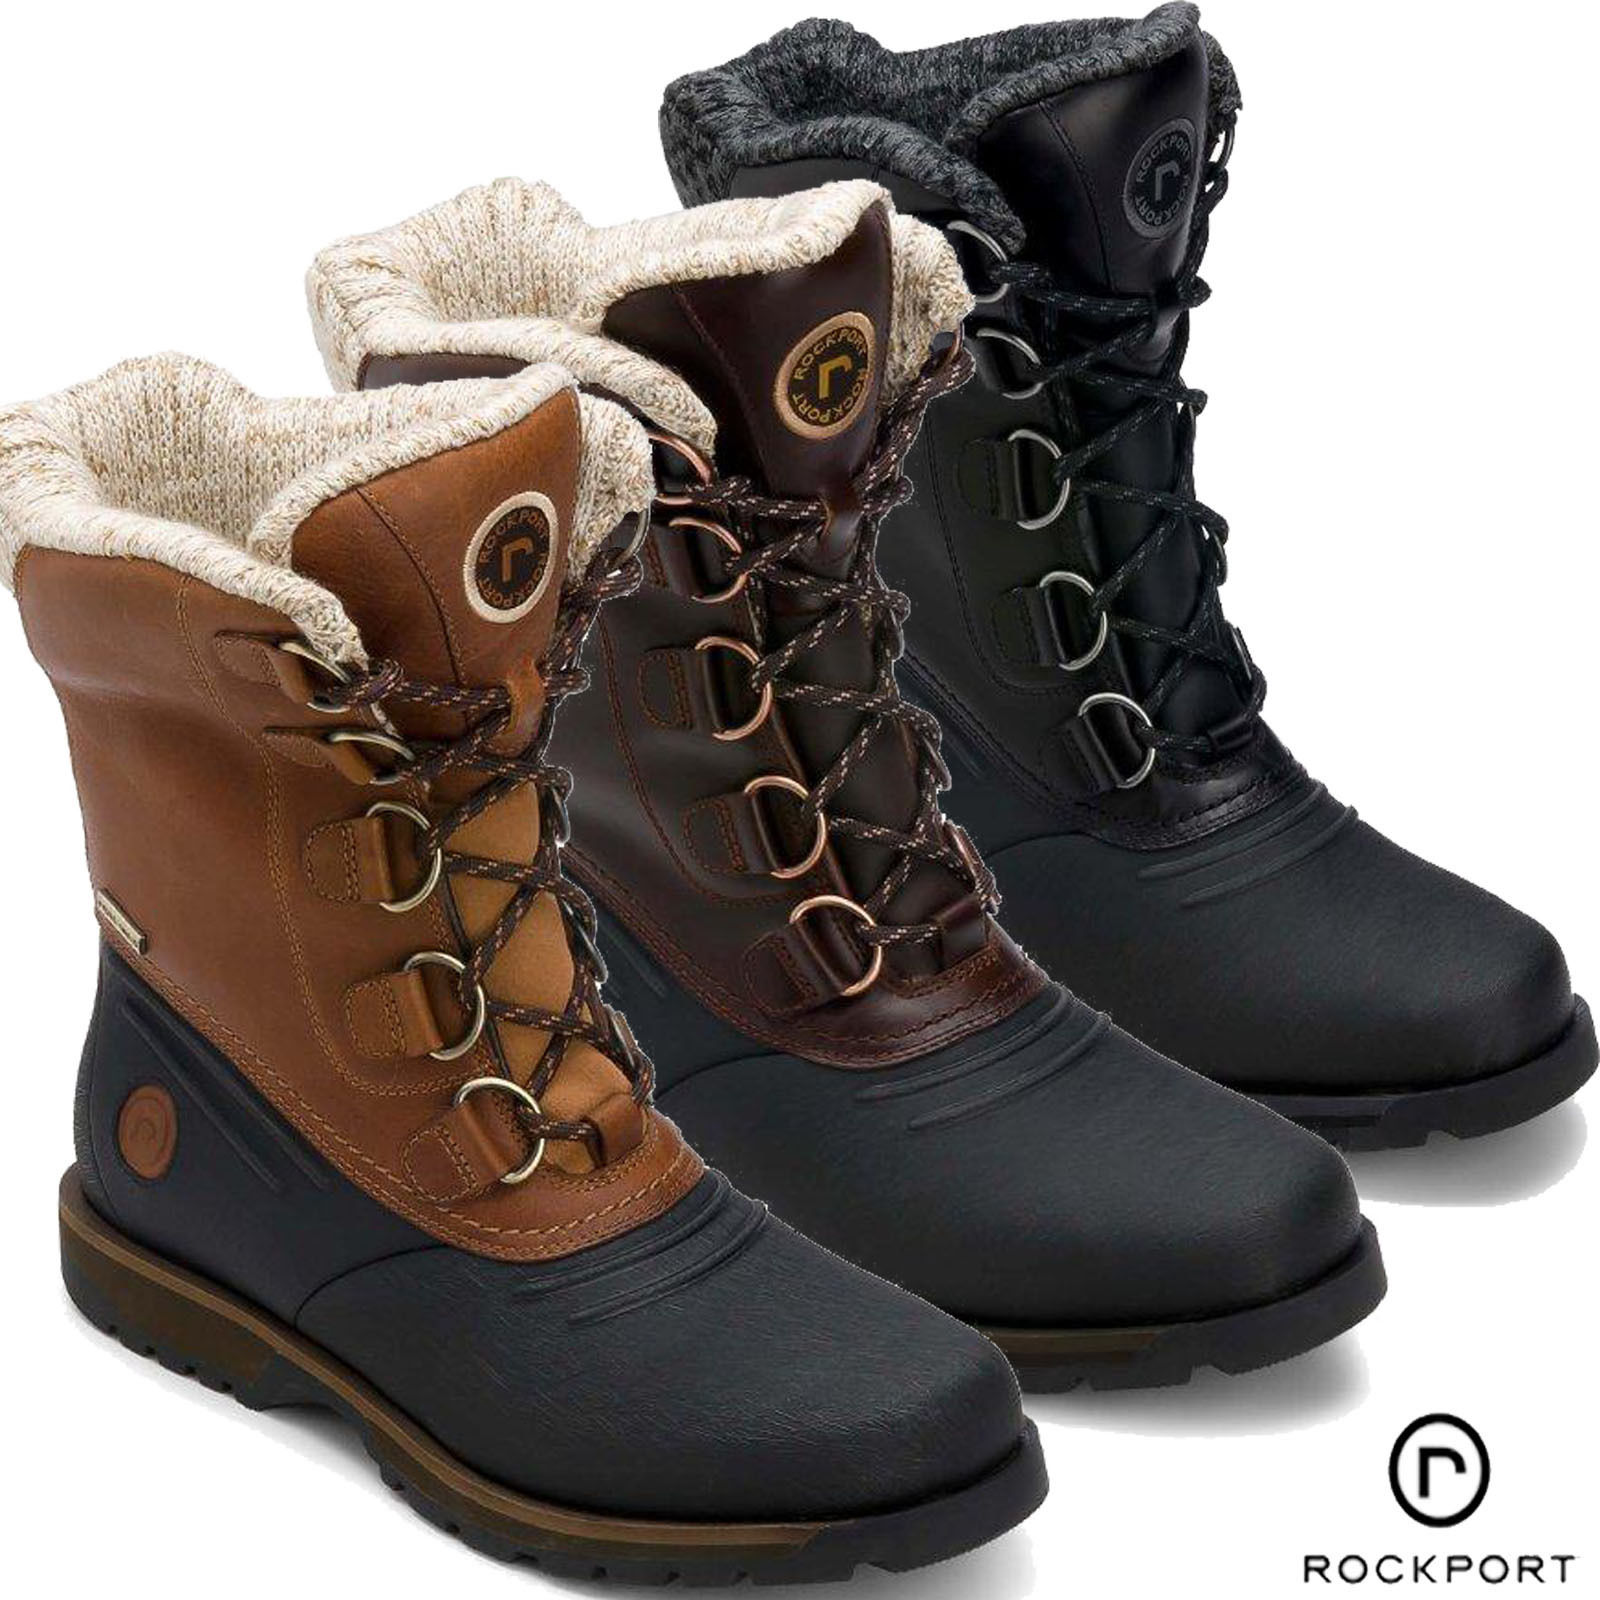 wool lined winter boots